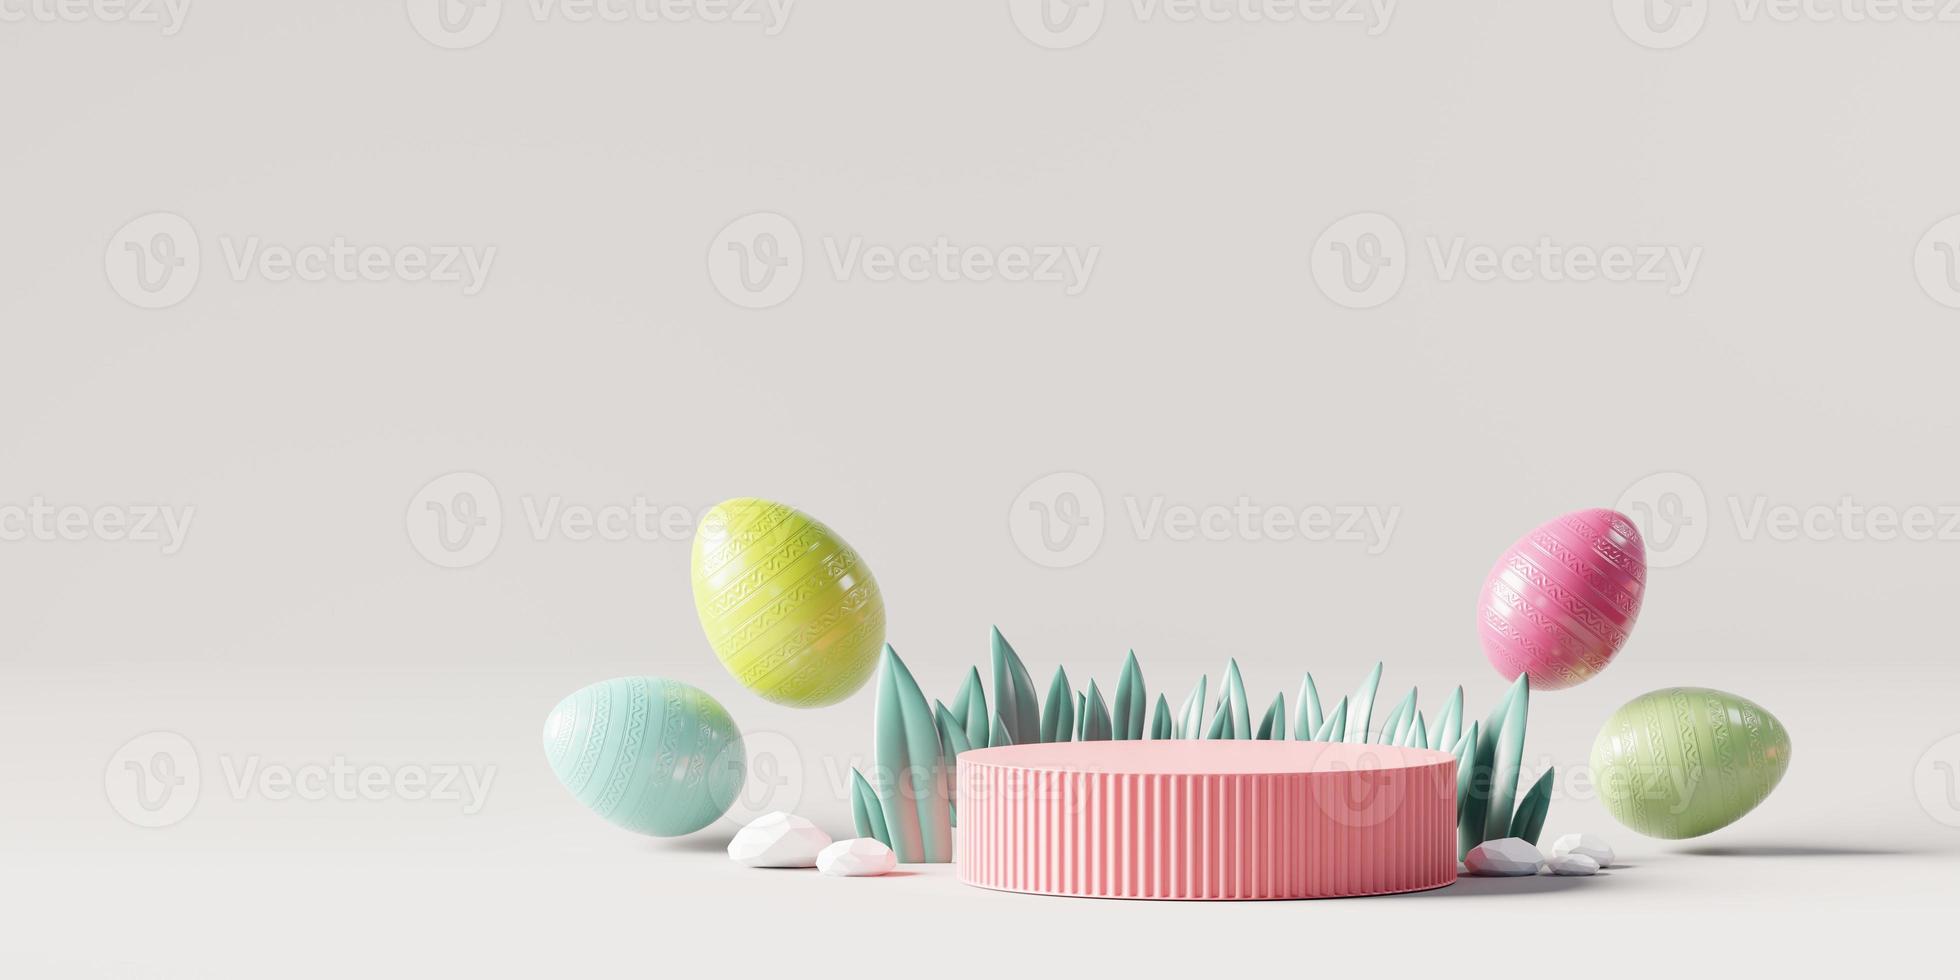 Abstract Easter Day Podium Platform For Product Display Showcase 3D Rendering photo